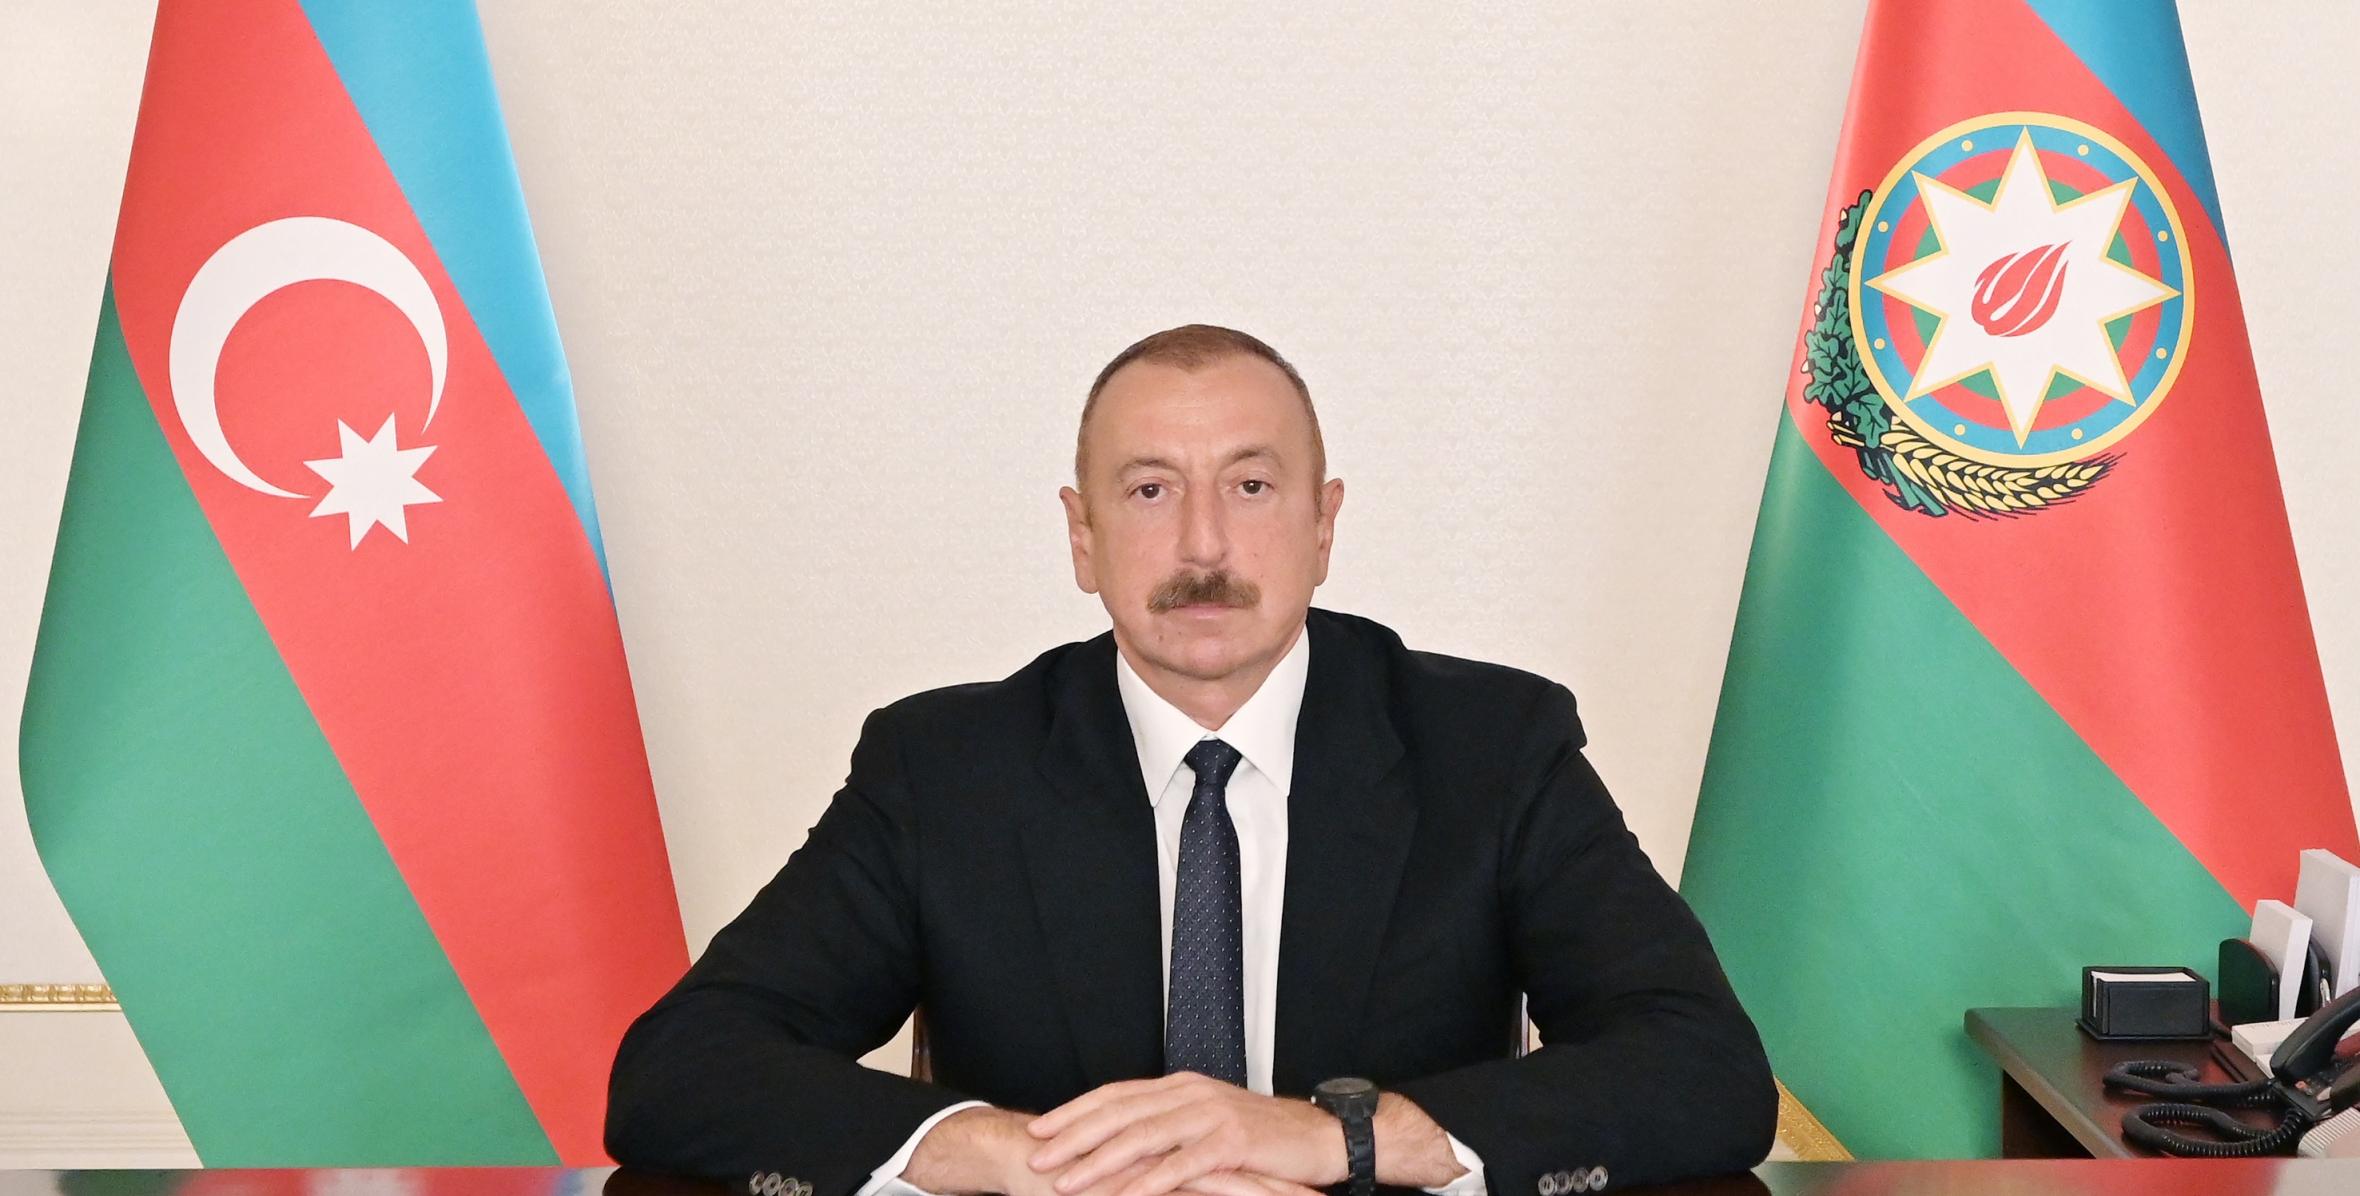 Rossiya-24 and Rossiya-1 TV channels aired an interview with President Ilham Aliyev in their reports